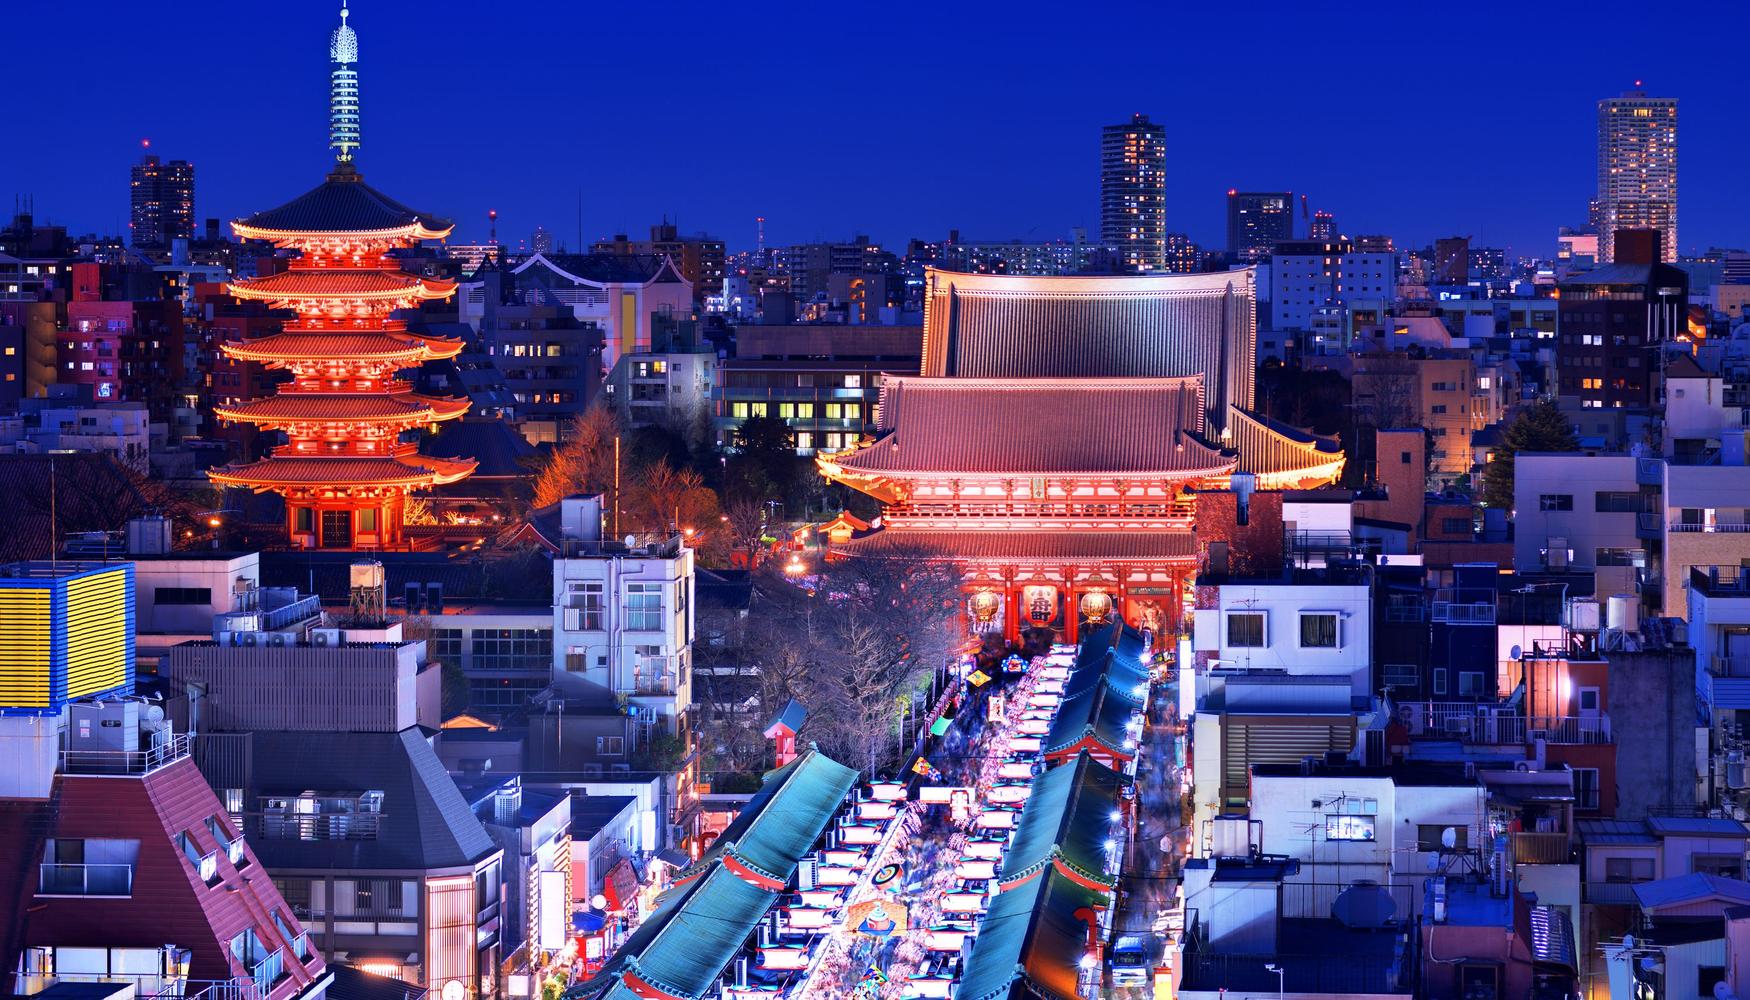 Tokyo Vacation Packages from 754 Search Flight+Hotel on KAYAK